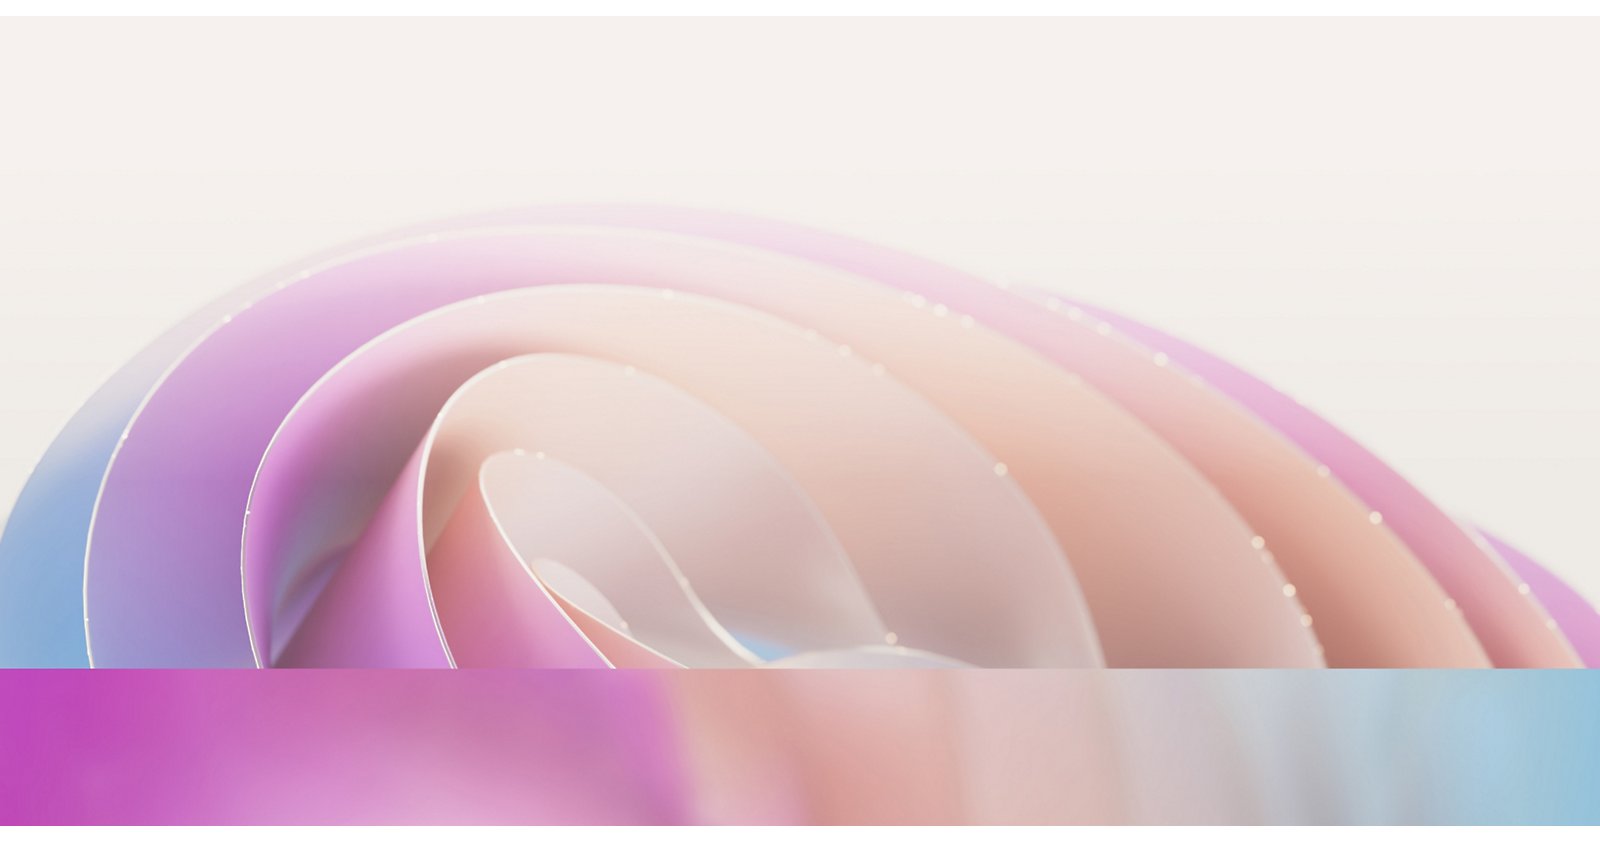 Abstract image featuring soft, overlapping pastel curves in shades of pink, purple, and blue, creating a gentle wave-like pattern.